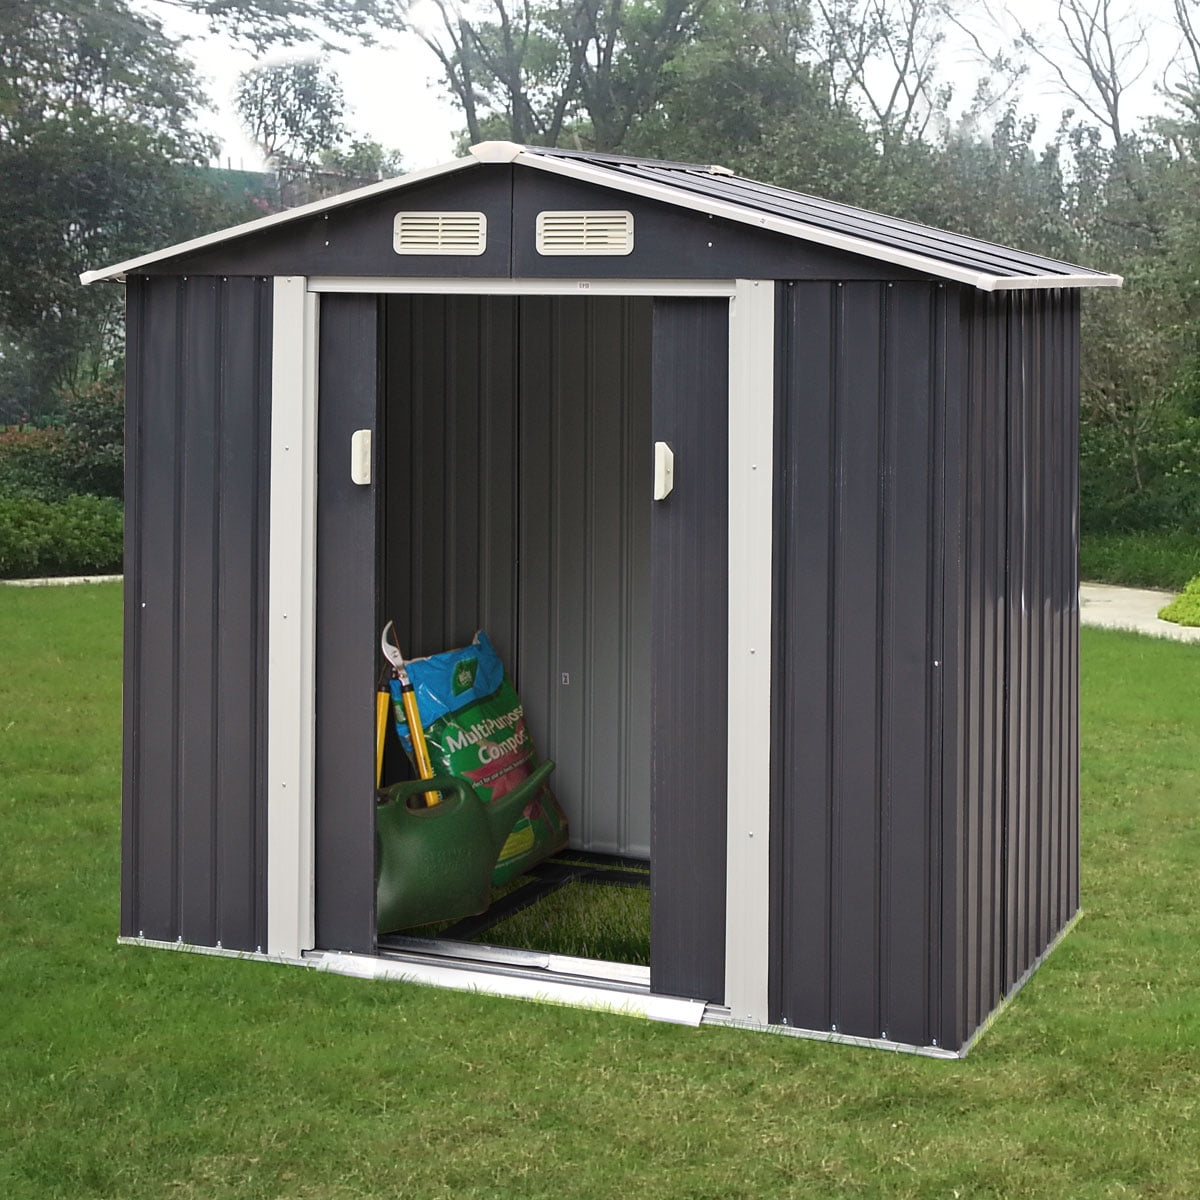 Jaxpety Garden Storage Shed Galvanized Steel Outdoor Tool House 7 x 4 